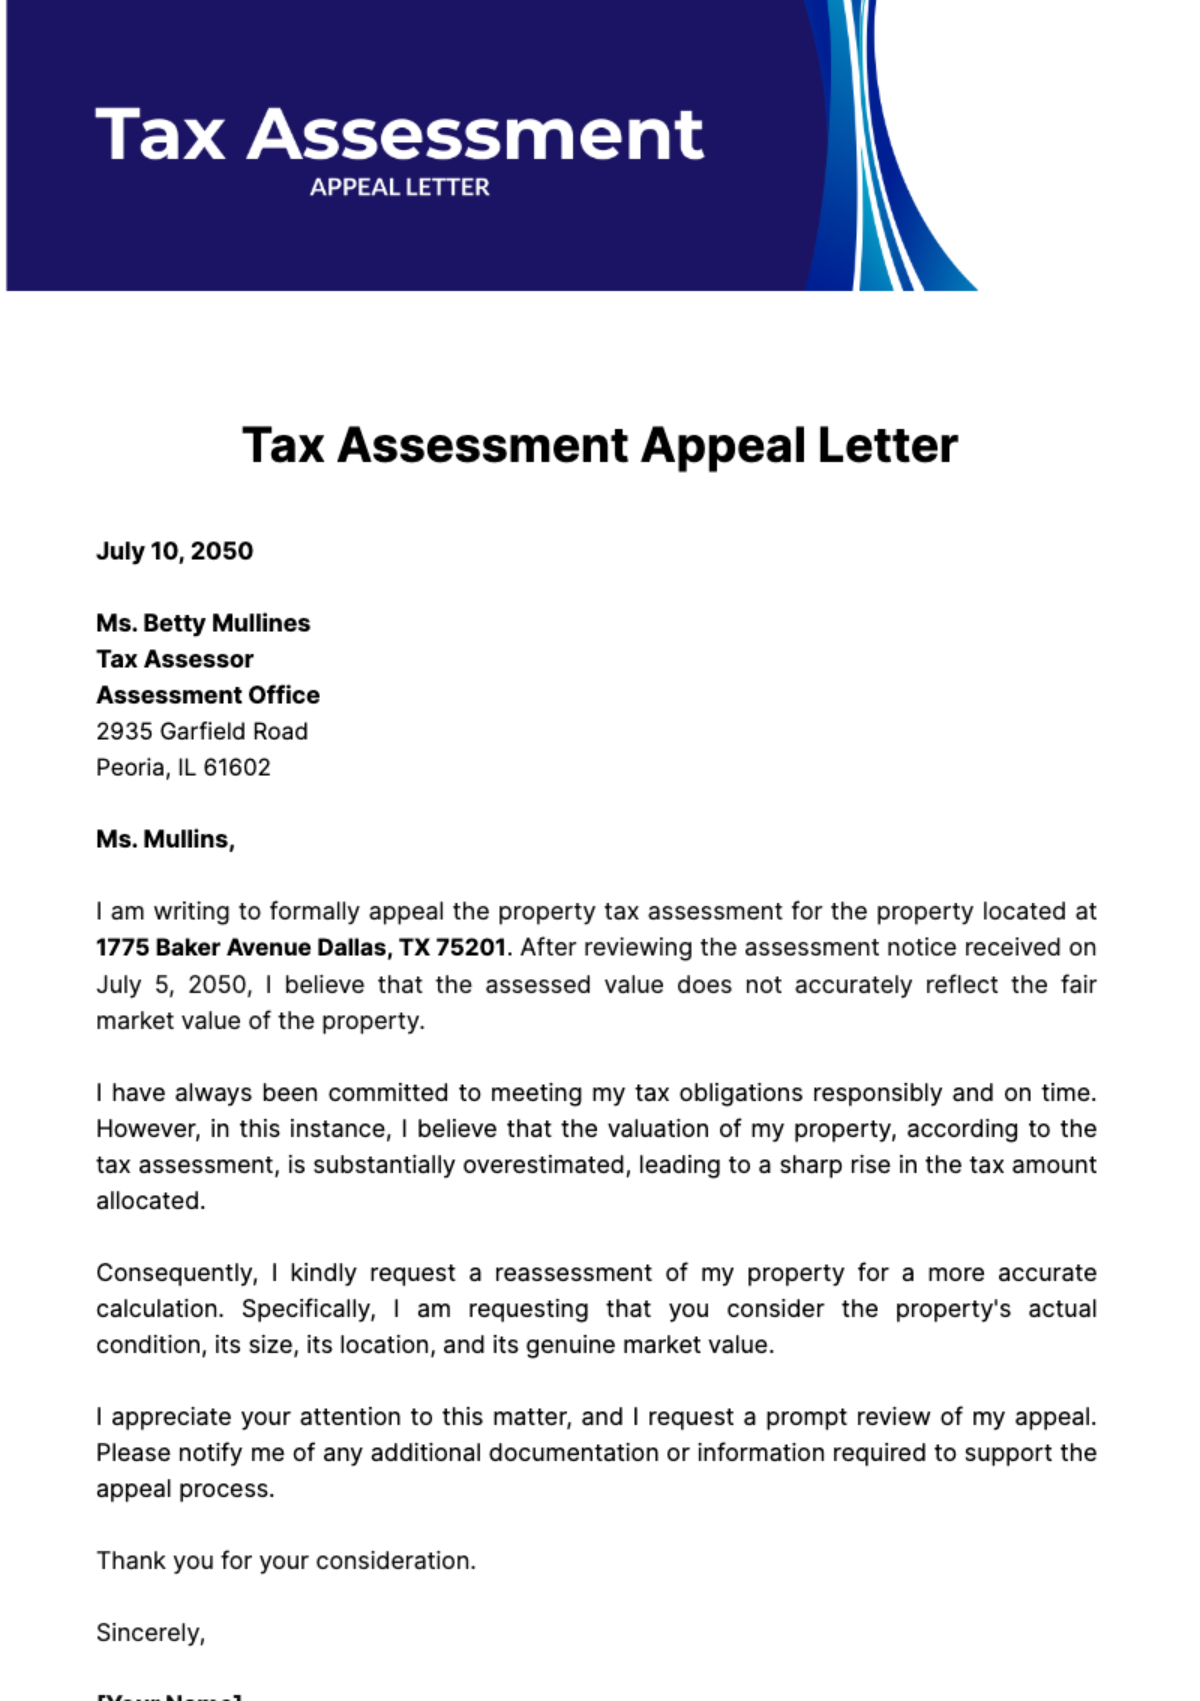 Tax Assessment Appeal Letter Template